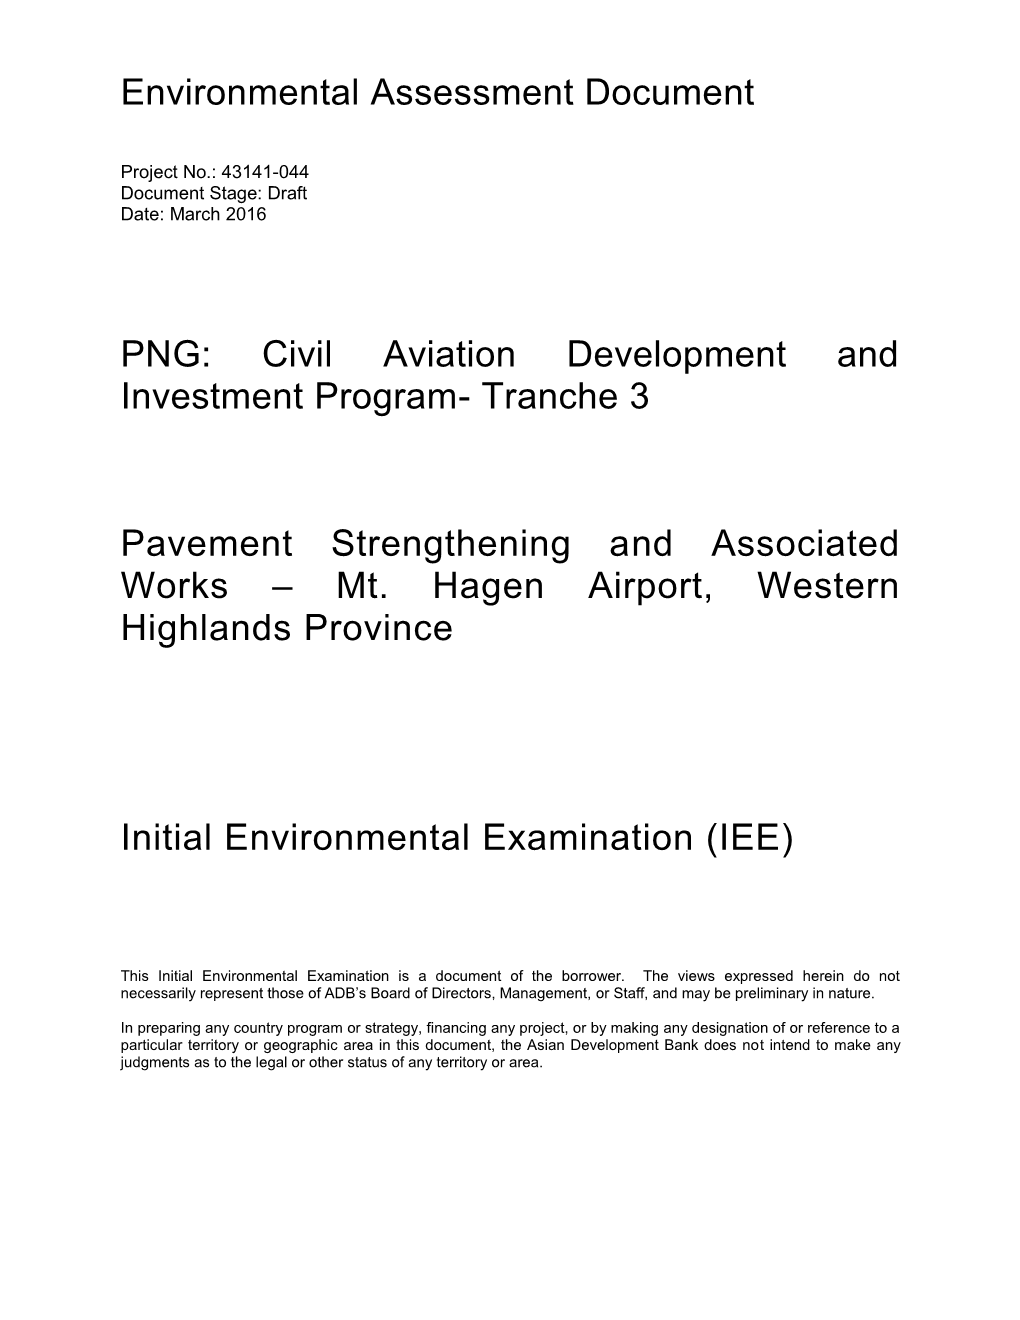 Environmental Assessment Document PNG: Civil Aviation Development and Investment Program- Tranche 3 Pavement Strengthening and A